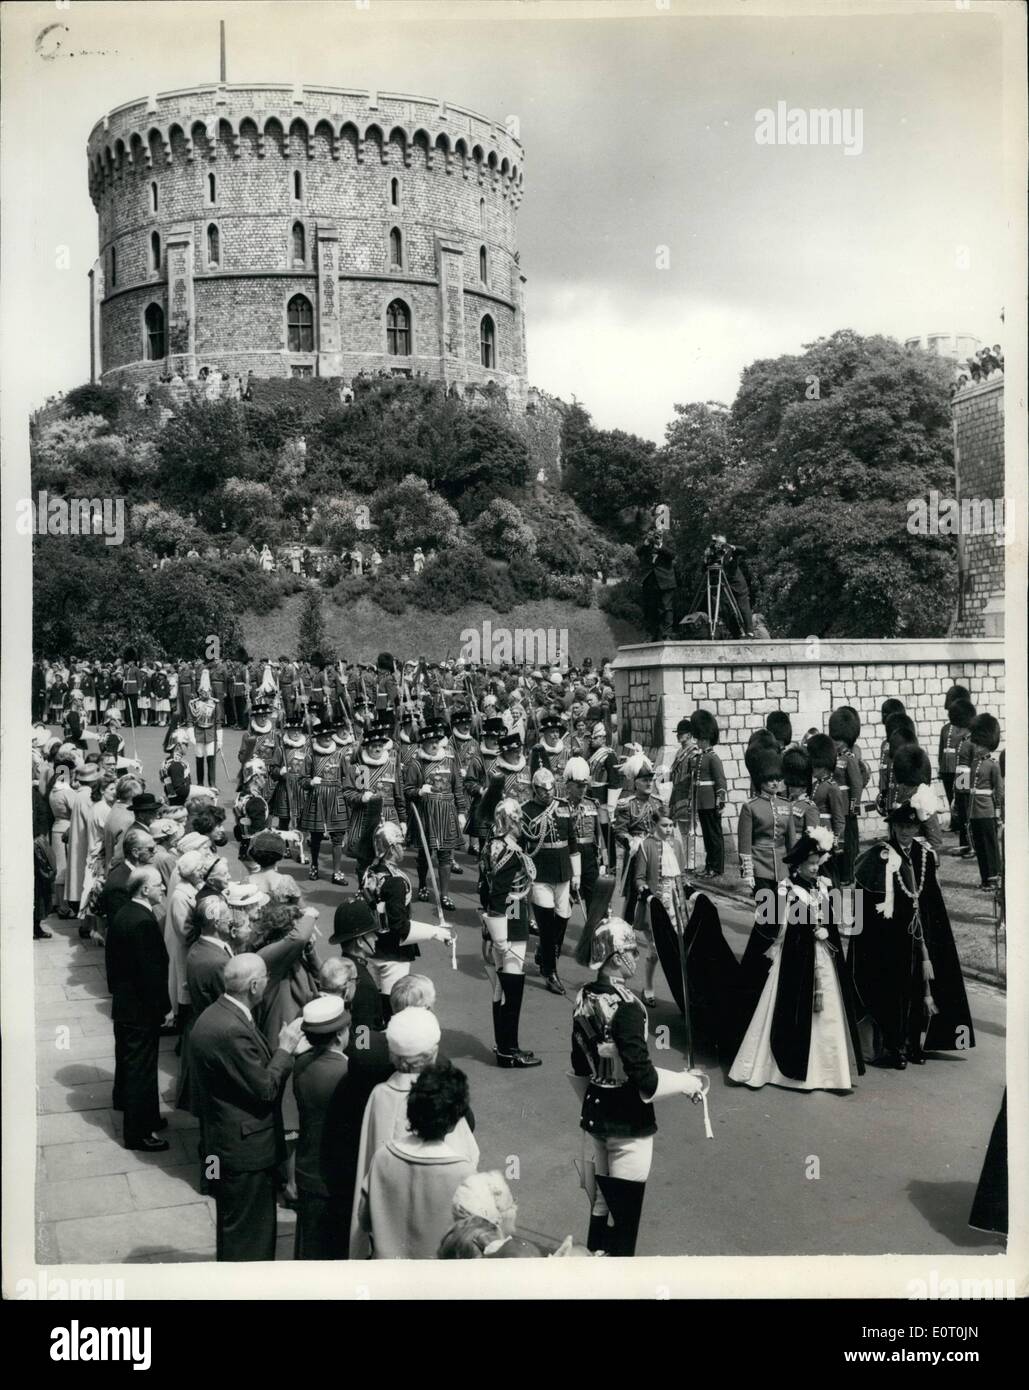 Jun. 06, 1960 - Queen At Garter Ceremony: Four new Knights Companions of the Most Noble Order of the Garter were invested by H.M. The Queen, who is Sovereign of the Order, at Windsor Castle today. The four new Knights Companions are Field Marshall Sir William Slim; The Duke of Northumberland; The Earl of Radnor, and Lord Digby. Photo shows General view showing H.M. The Queen and Prince Philip in procession to St. George's Chapel at Windsor Castle today, showing the Round Tower in the background. Stock Photo